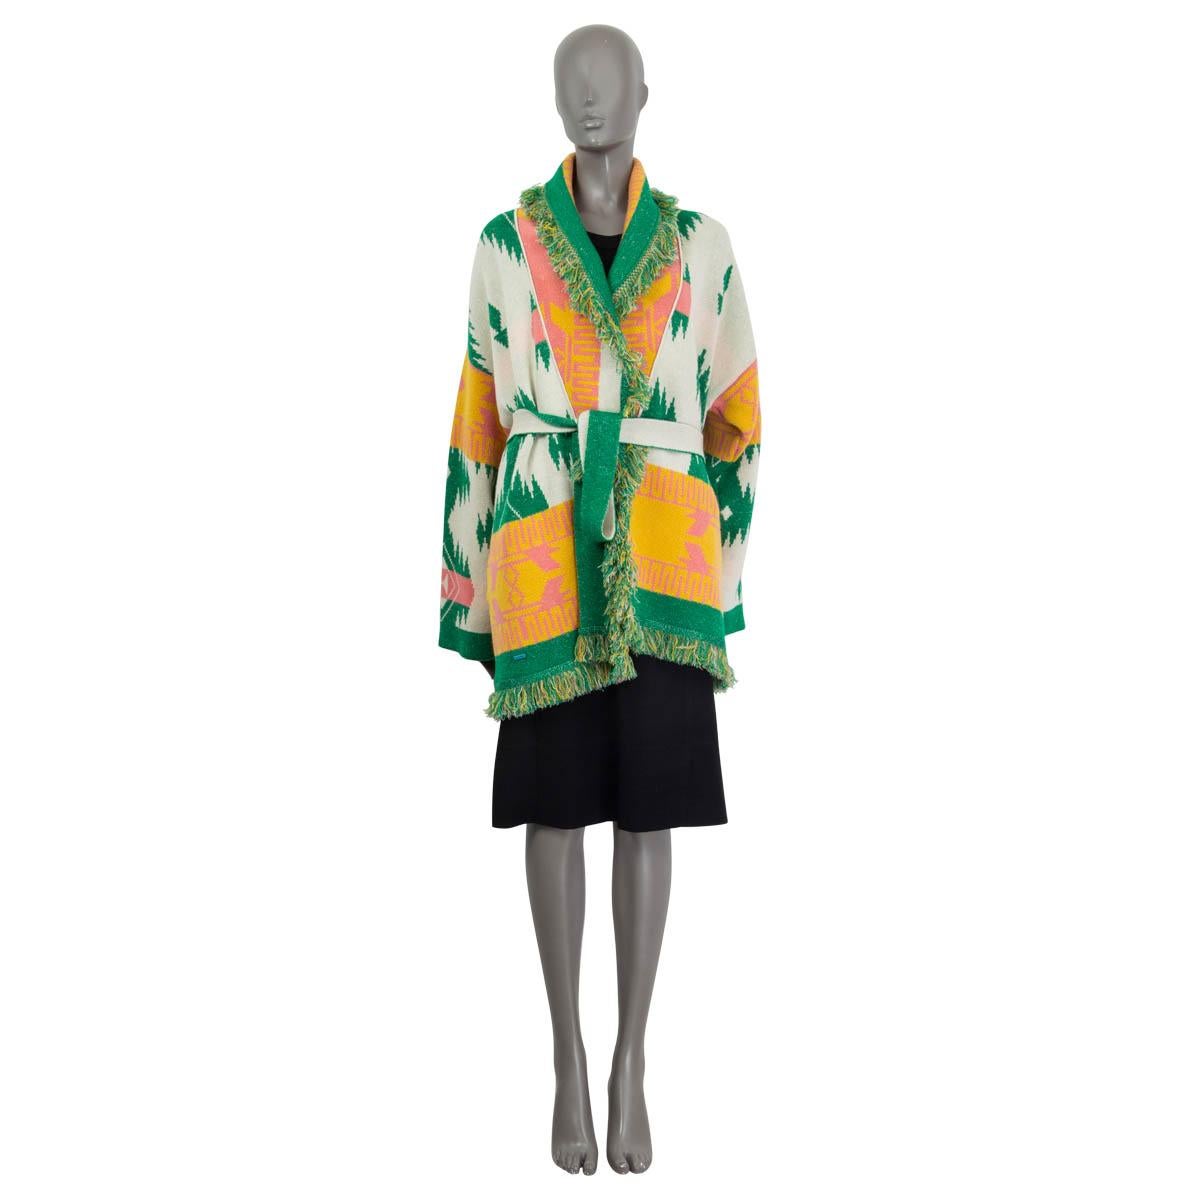 100% authentic Alanui icon jacquard cardigan in green, white, pink and orange cashmere (68%) and linen (32%). Features side slit pockets, fringed ends and a detachable self-tie belt. Brand new, with tags.

Measurements
Tag Size	L
Size	L
Shoulder